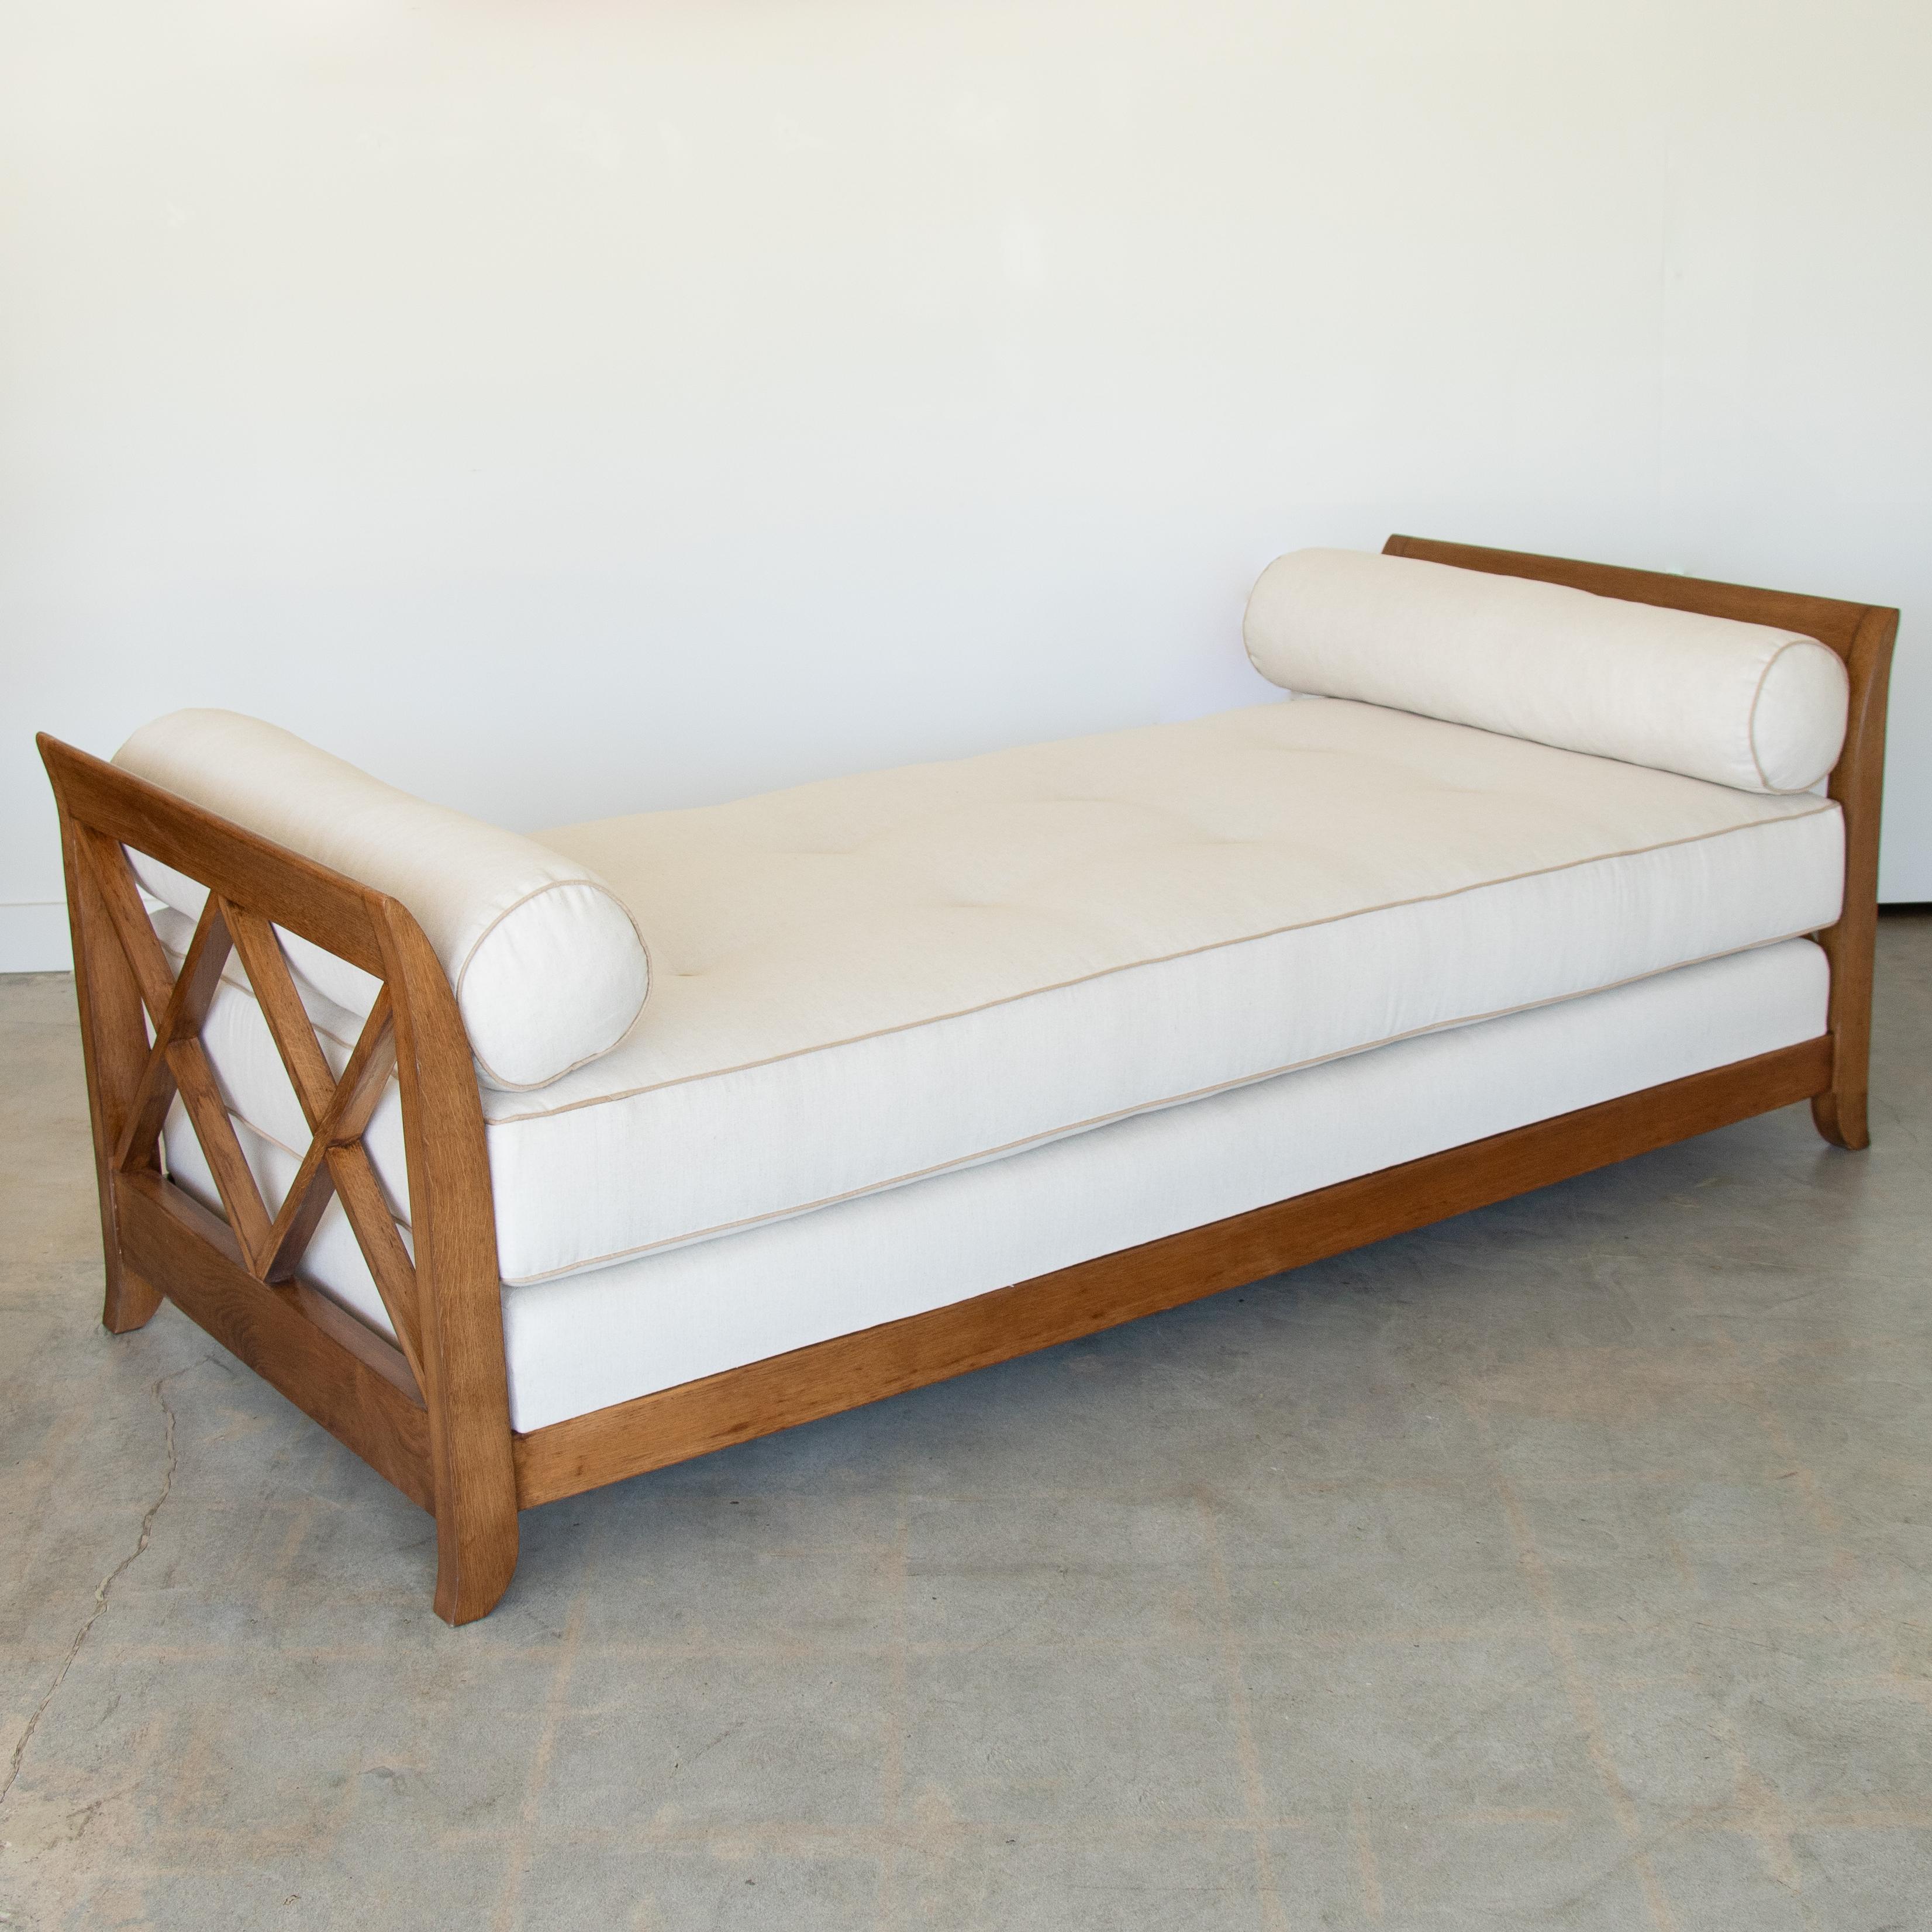 Incredible vintage French daybed in the style of Jean Royère, circa 1940's. Long oak wood frame with croisillon detail. Newly refinished wood showing beautiful natural grain. Newly added cream linen cushion with tan linen trim and button detail.